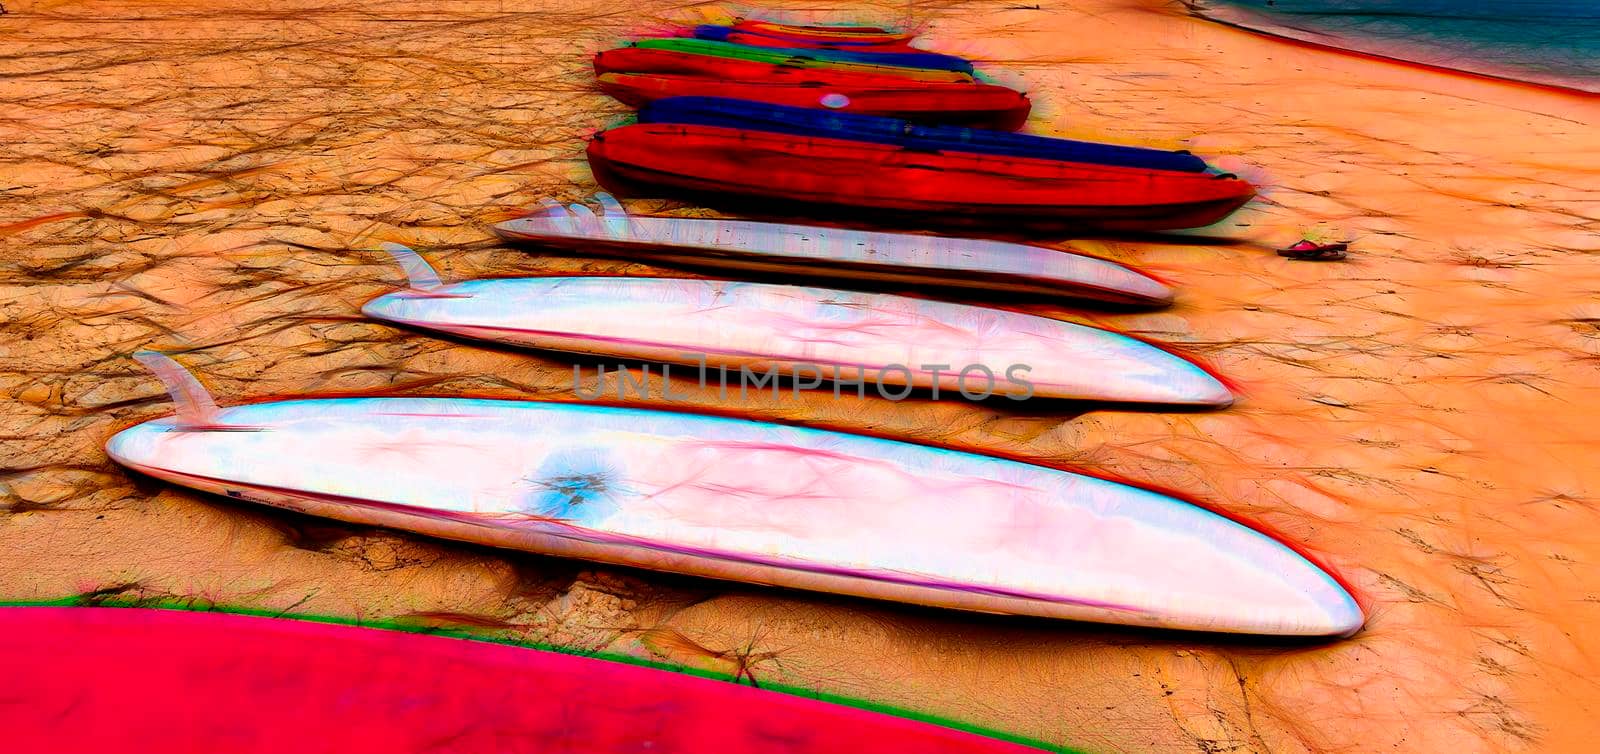 Blurred abstract painting of surfboards and kayaks for hire on a sandy island beach illustration